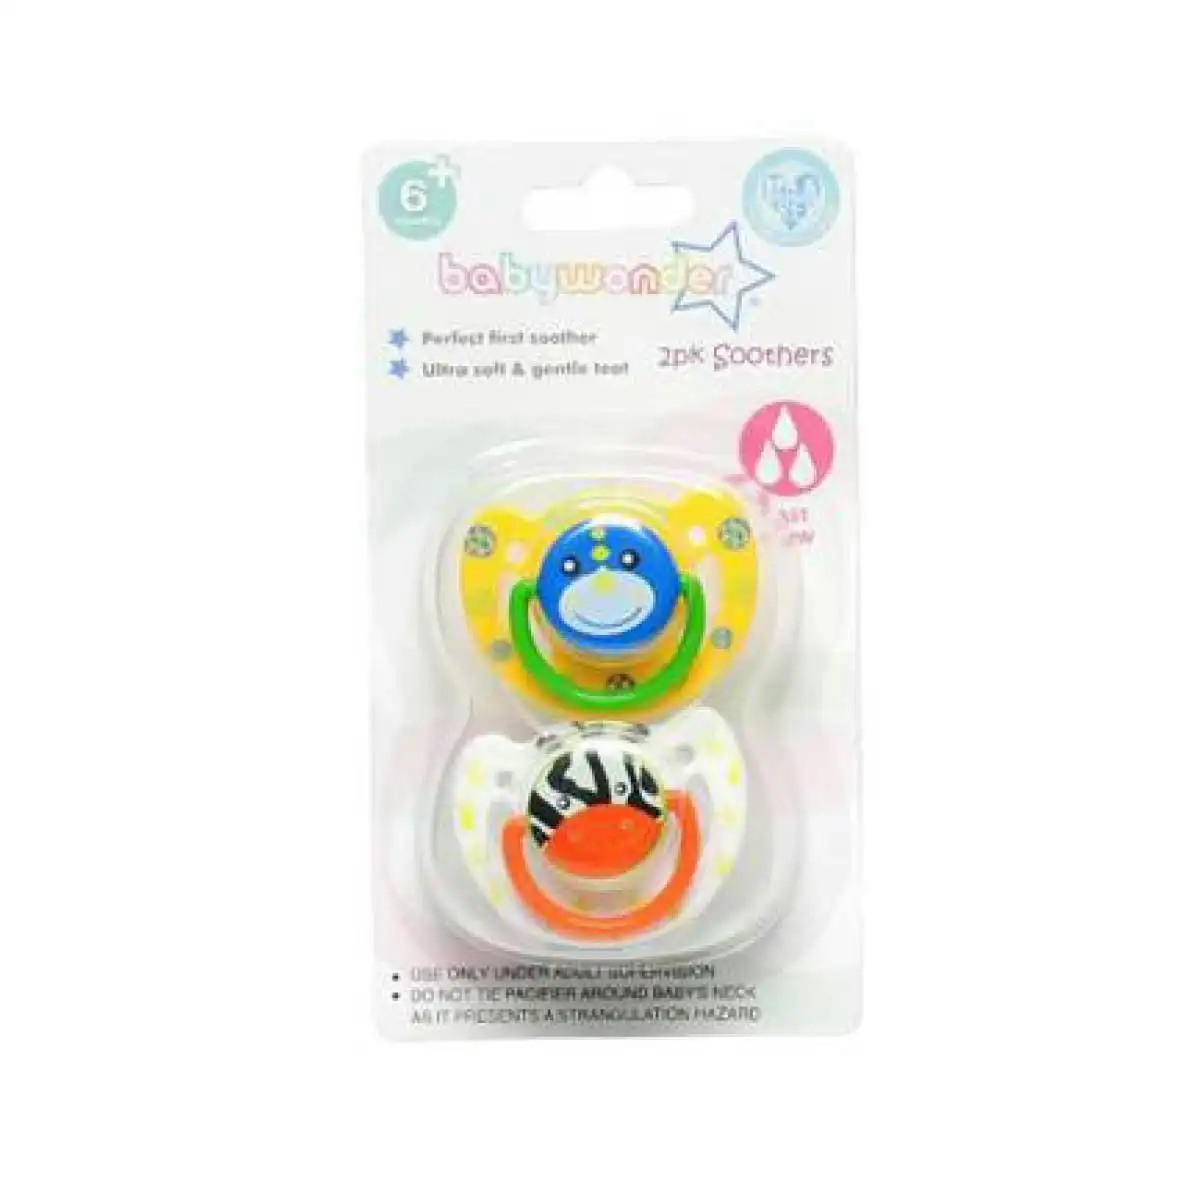 Baby Wonder Baby Pacifier with Nipple, for 6+, No chain, 2/Pack